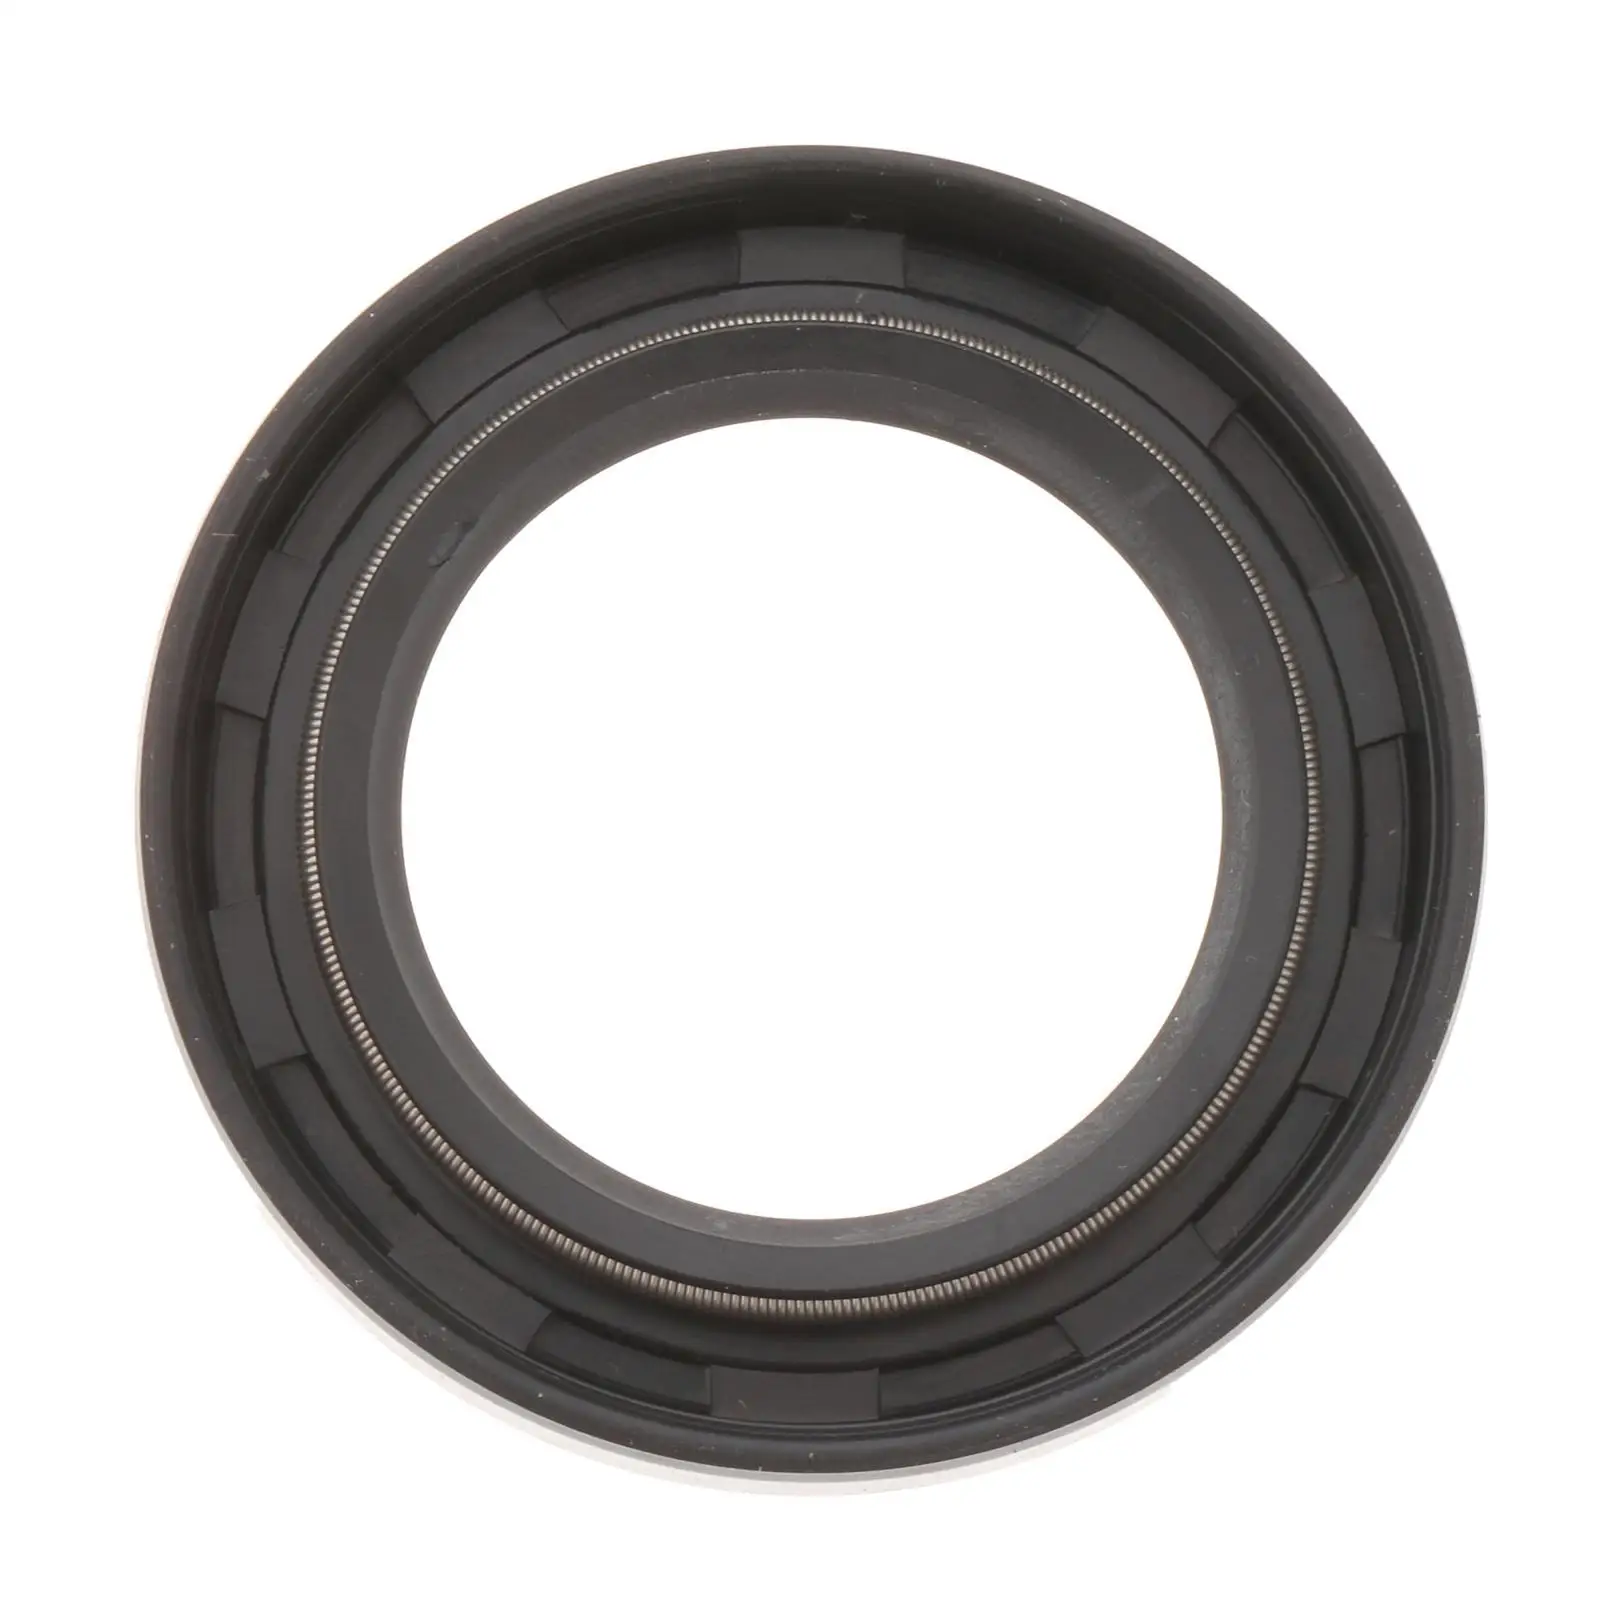 Oil Seal    Outboard Motor 2T 60HP-90HP Accessory Replacement